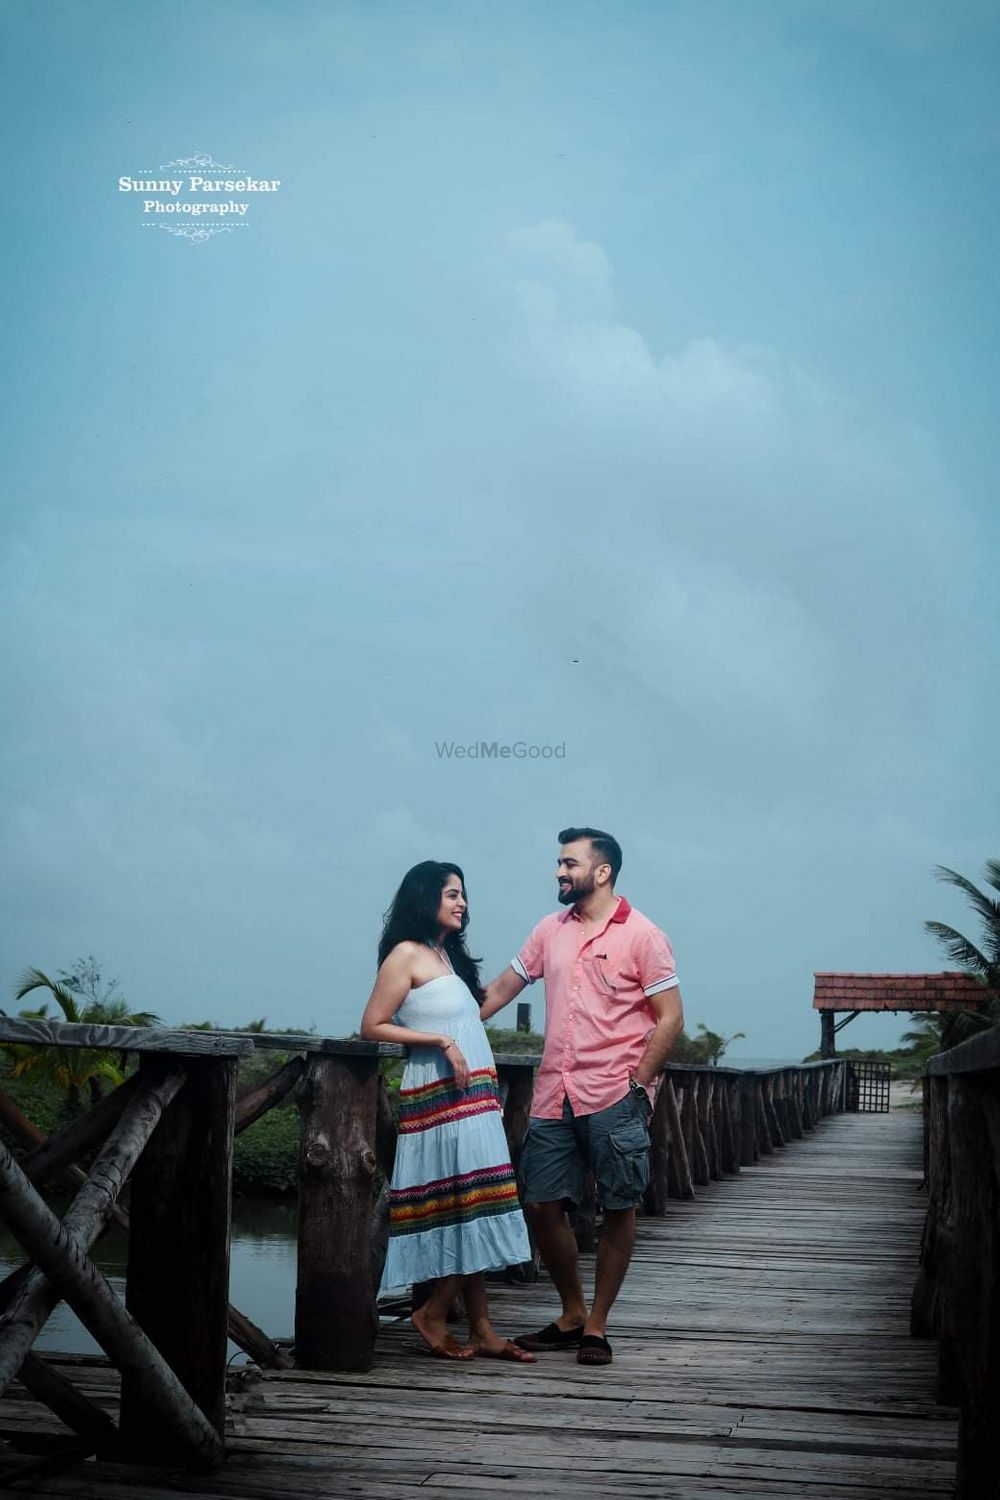 Photo From Pre Wedding - By Sunny Parsekar Photography